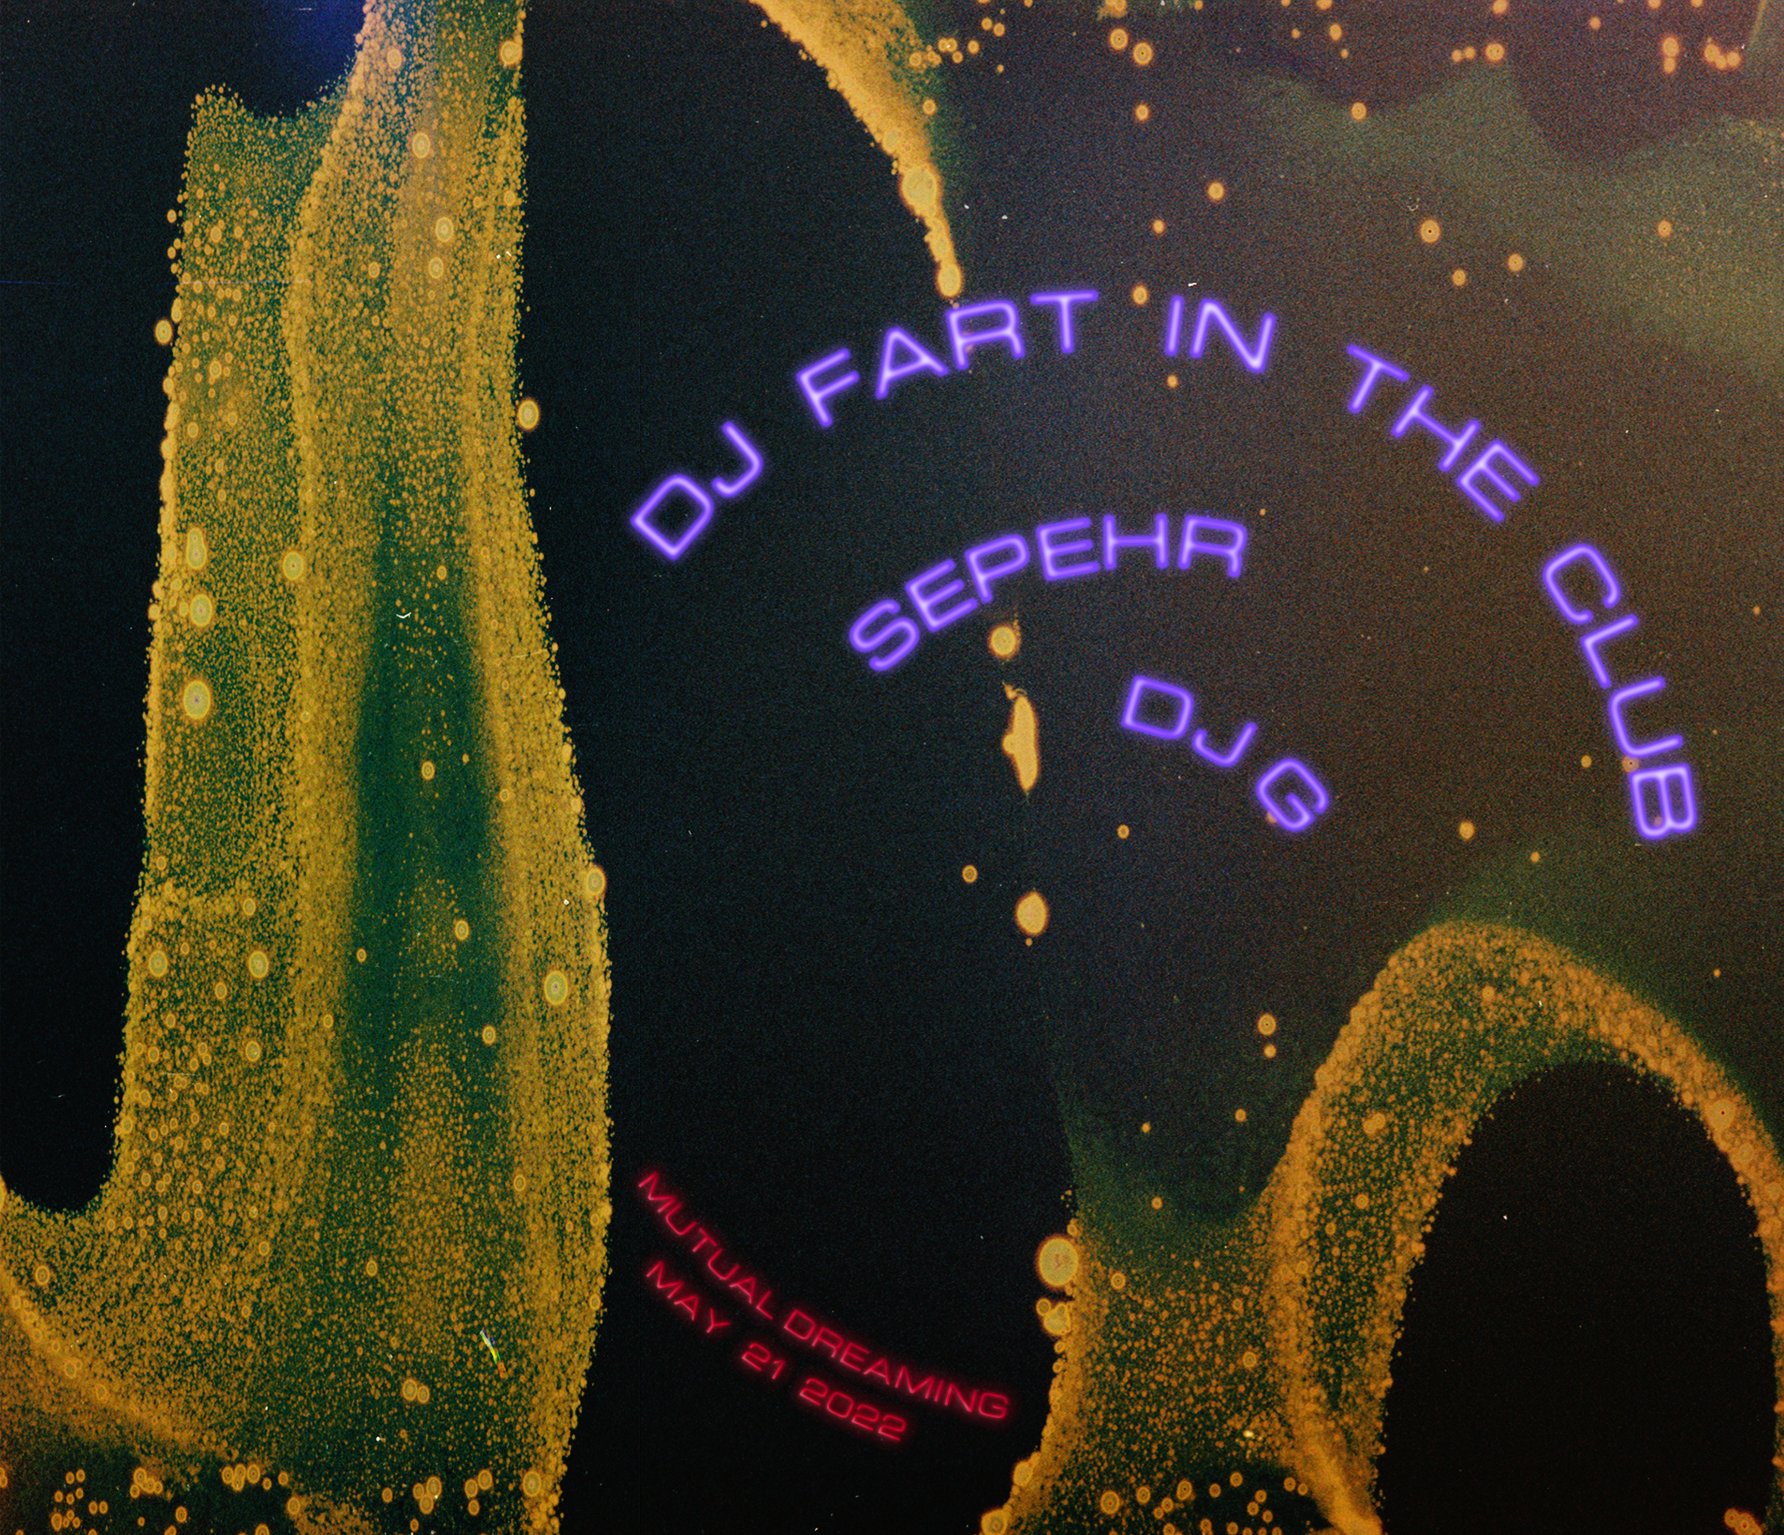    Mutual Dreaming: DJ Fart In The Club, Sepehr, DJ G   May 2022 